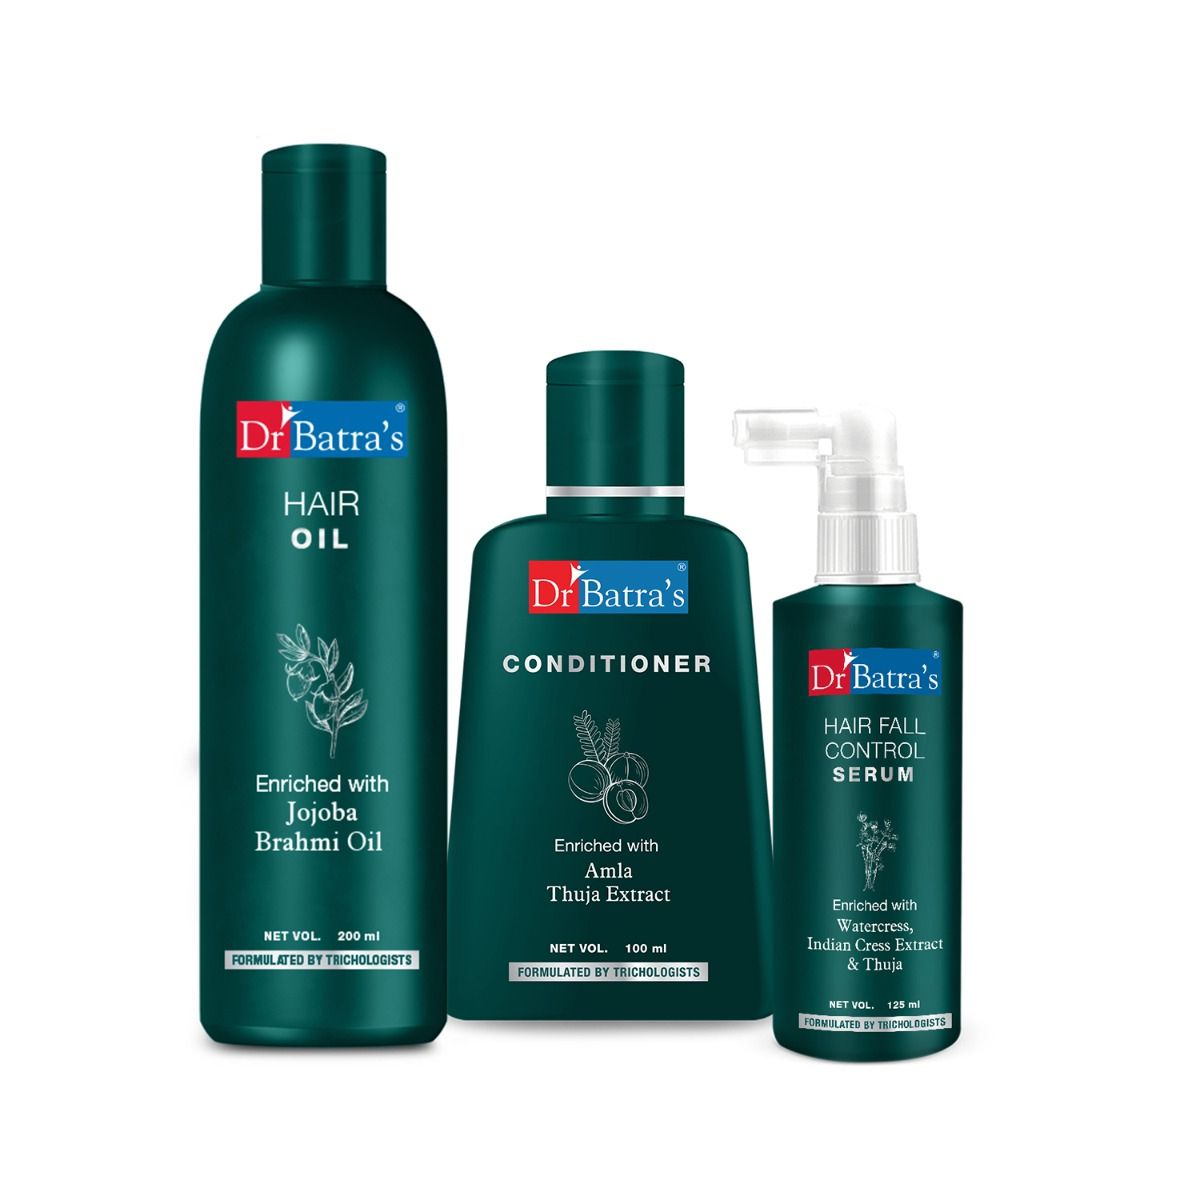     			Dr Batra's Hair Fall Control Serum-125 ml, Conditioner - 100 ml and Hair Oil - 200 ml (Pack of 3)